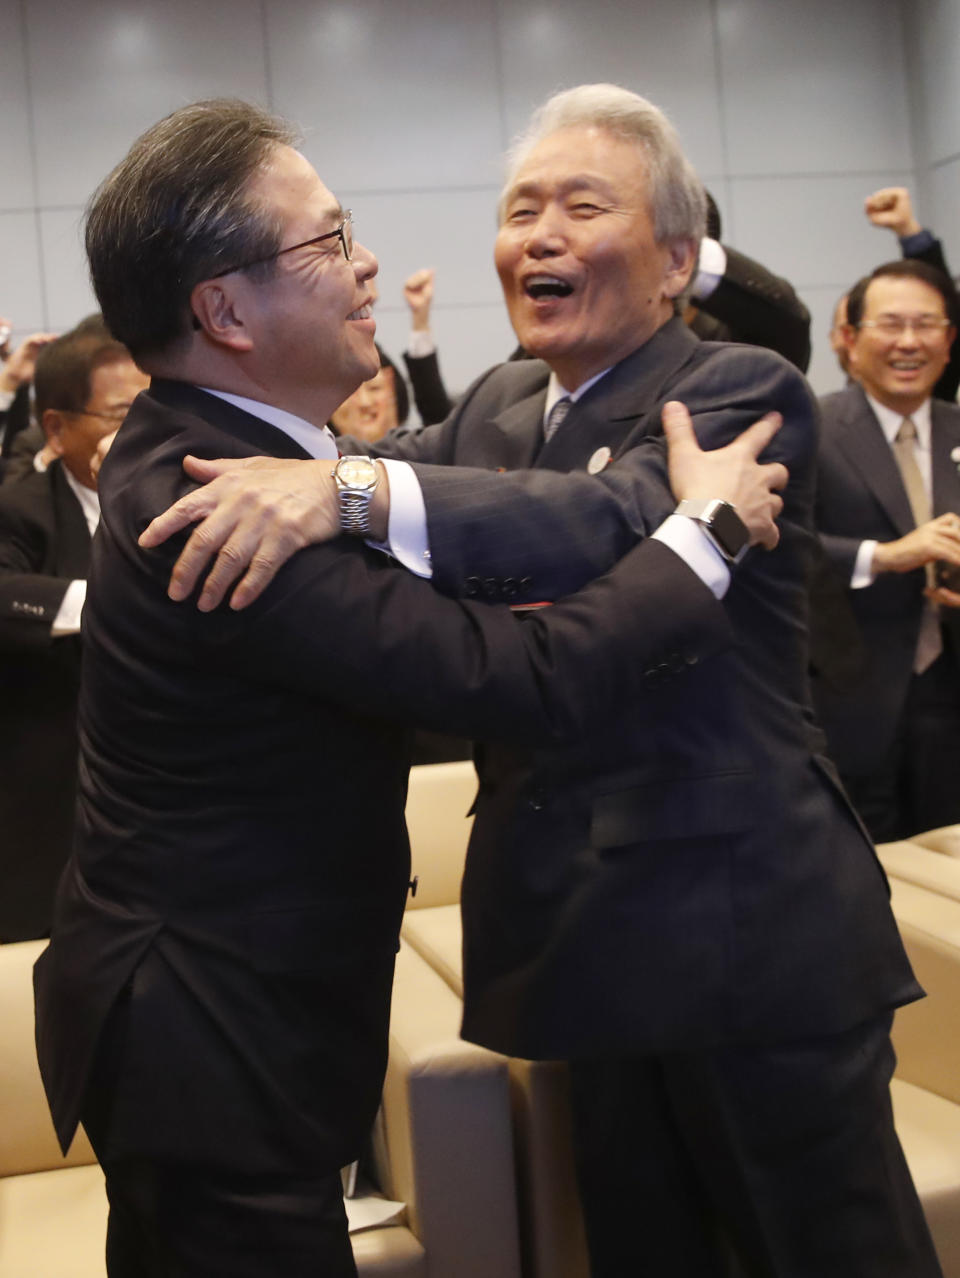 Japan's Economy, Trade and Industry Minister Hiroshige Seko,left, and head of 2025 Japan World Expo committee Sadayuki Sakakibara celebrate after winning the vote at the 164th General Assembly of the Bureau International des Expositions (BIE) in Paris, Friday, Nov. 23, 2018. Japan's Osaka will host the World Expo in 2025, beating out Russia, Azerbaijan for an event that attracts millions. (AP Photo/Christophe Ena)